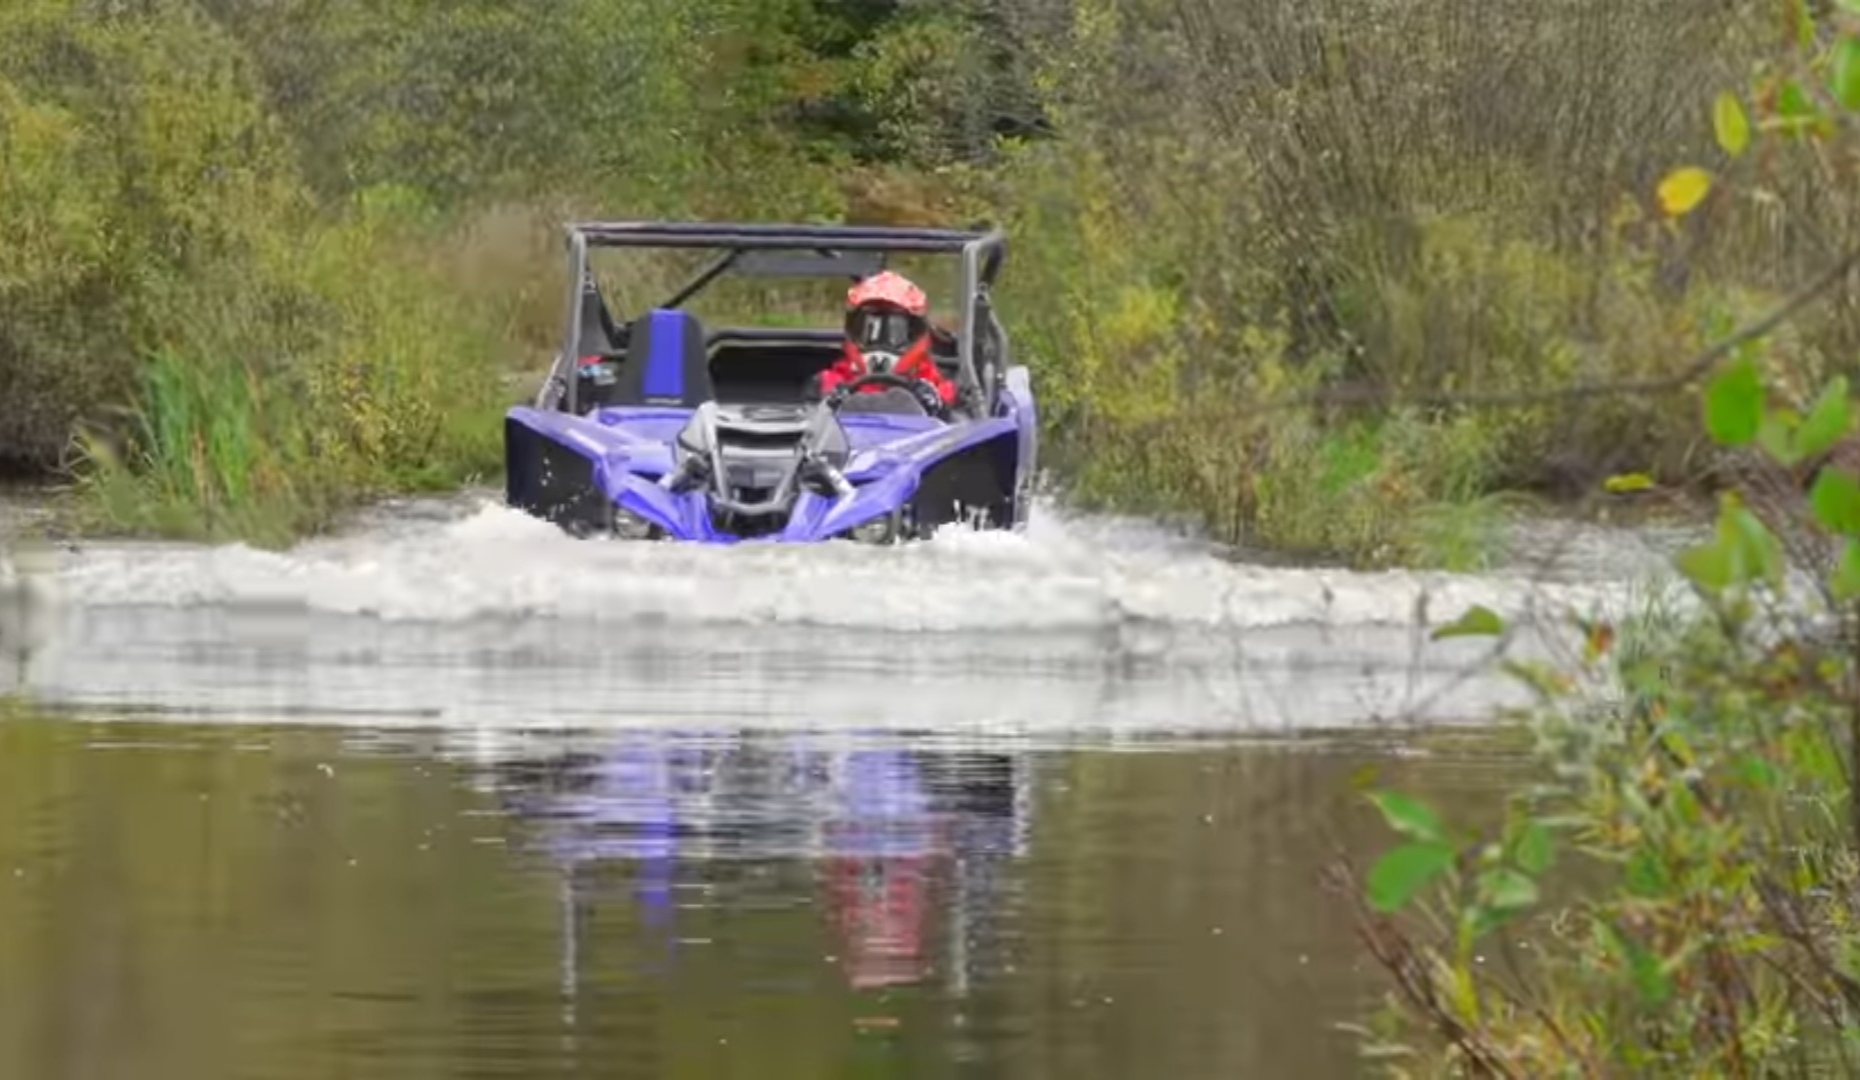 A Yamaha YXZ is being driven through a river.